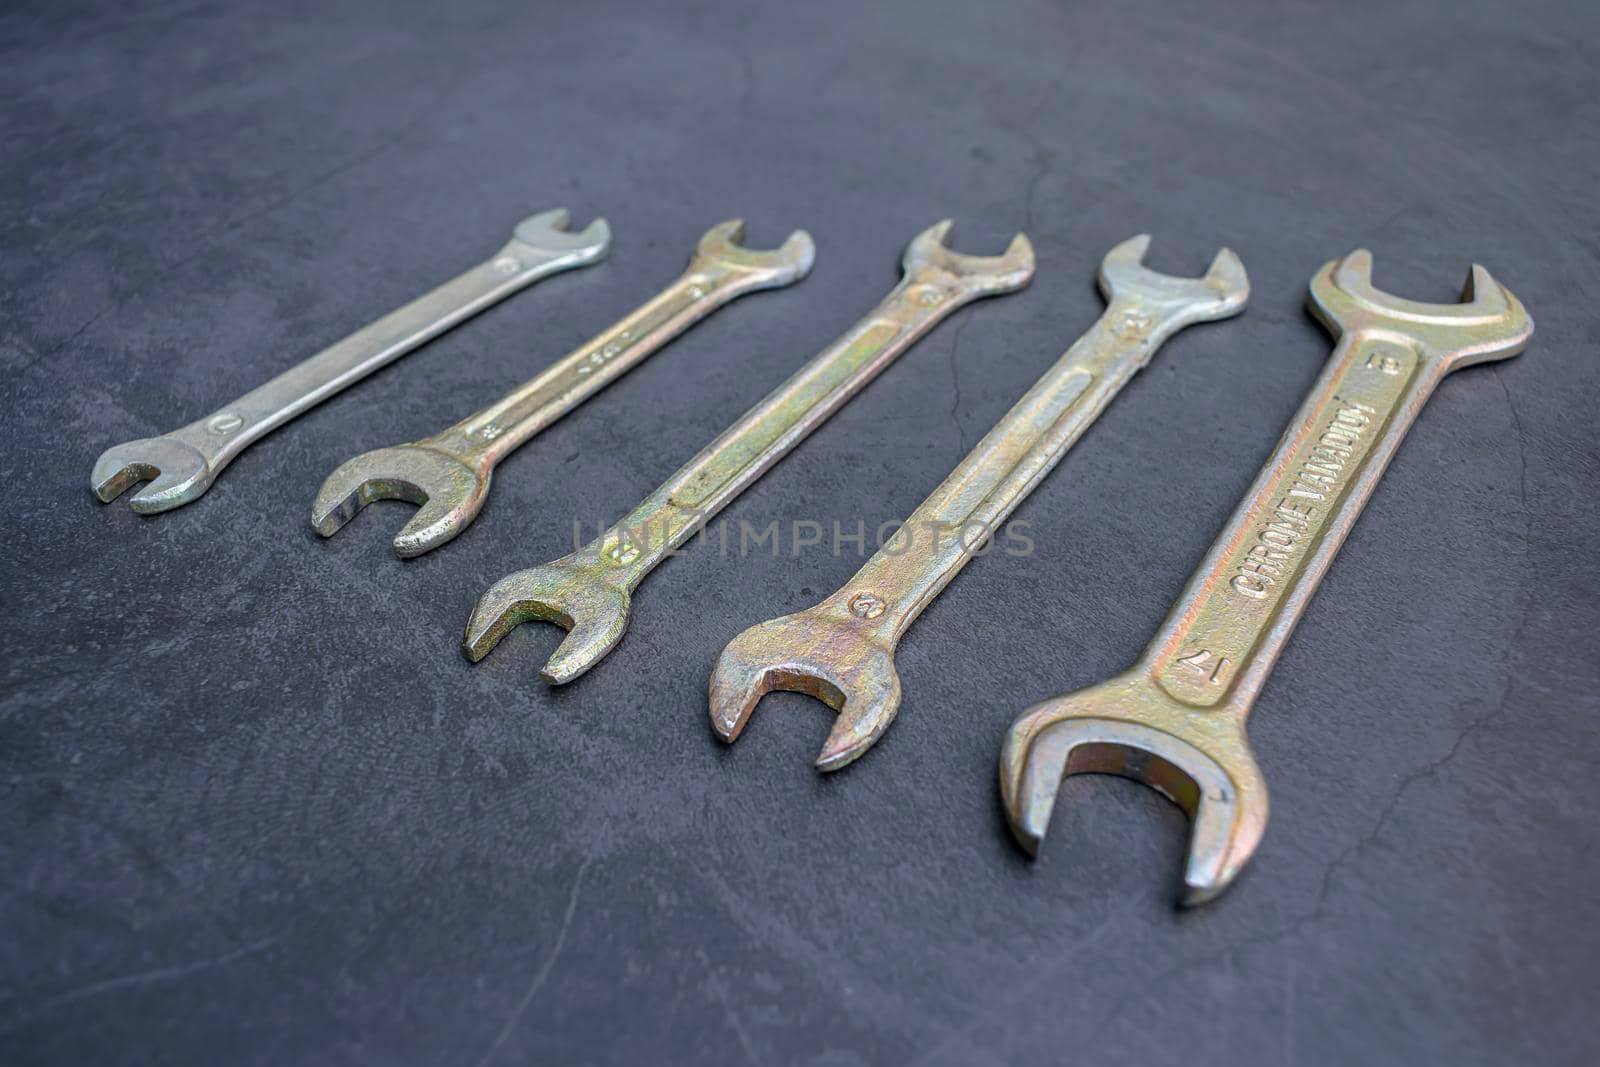 Set of new wrenches made of chromium and vanadium alloy on a dark surface